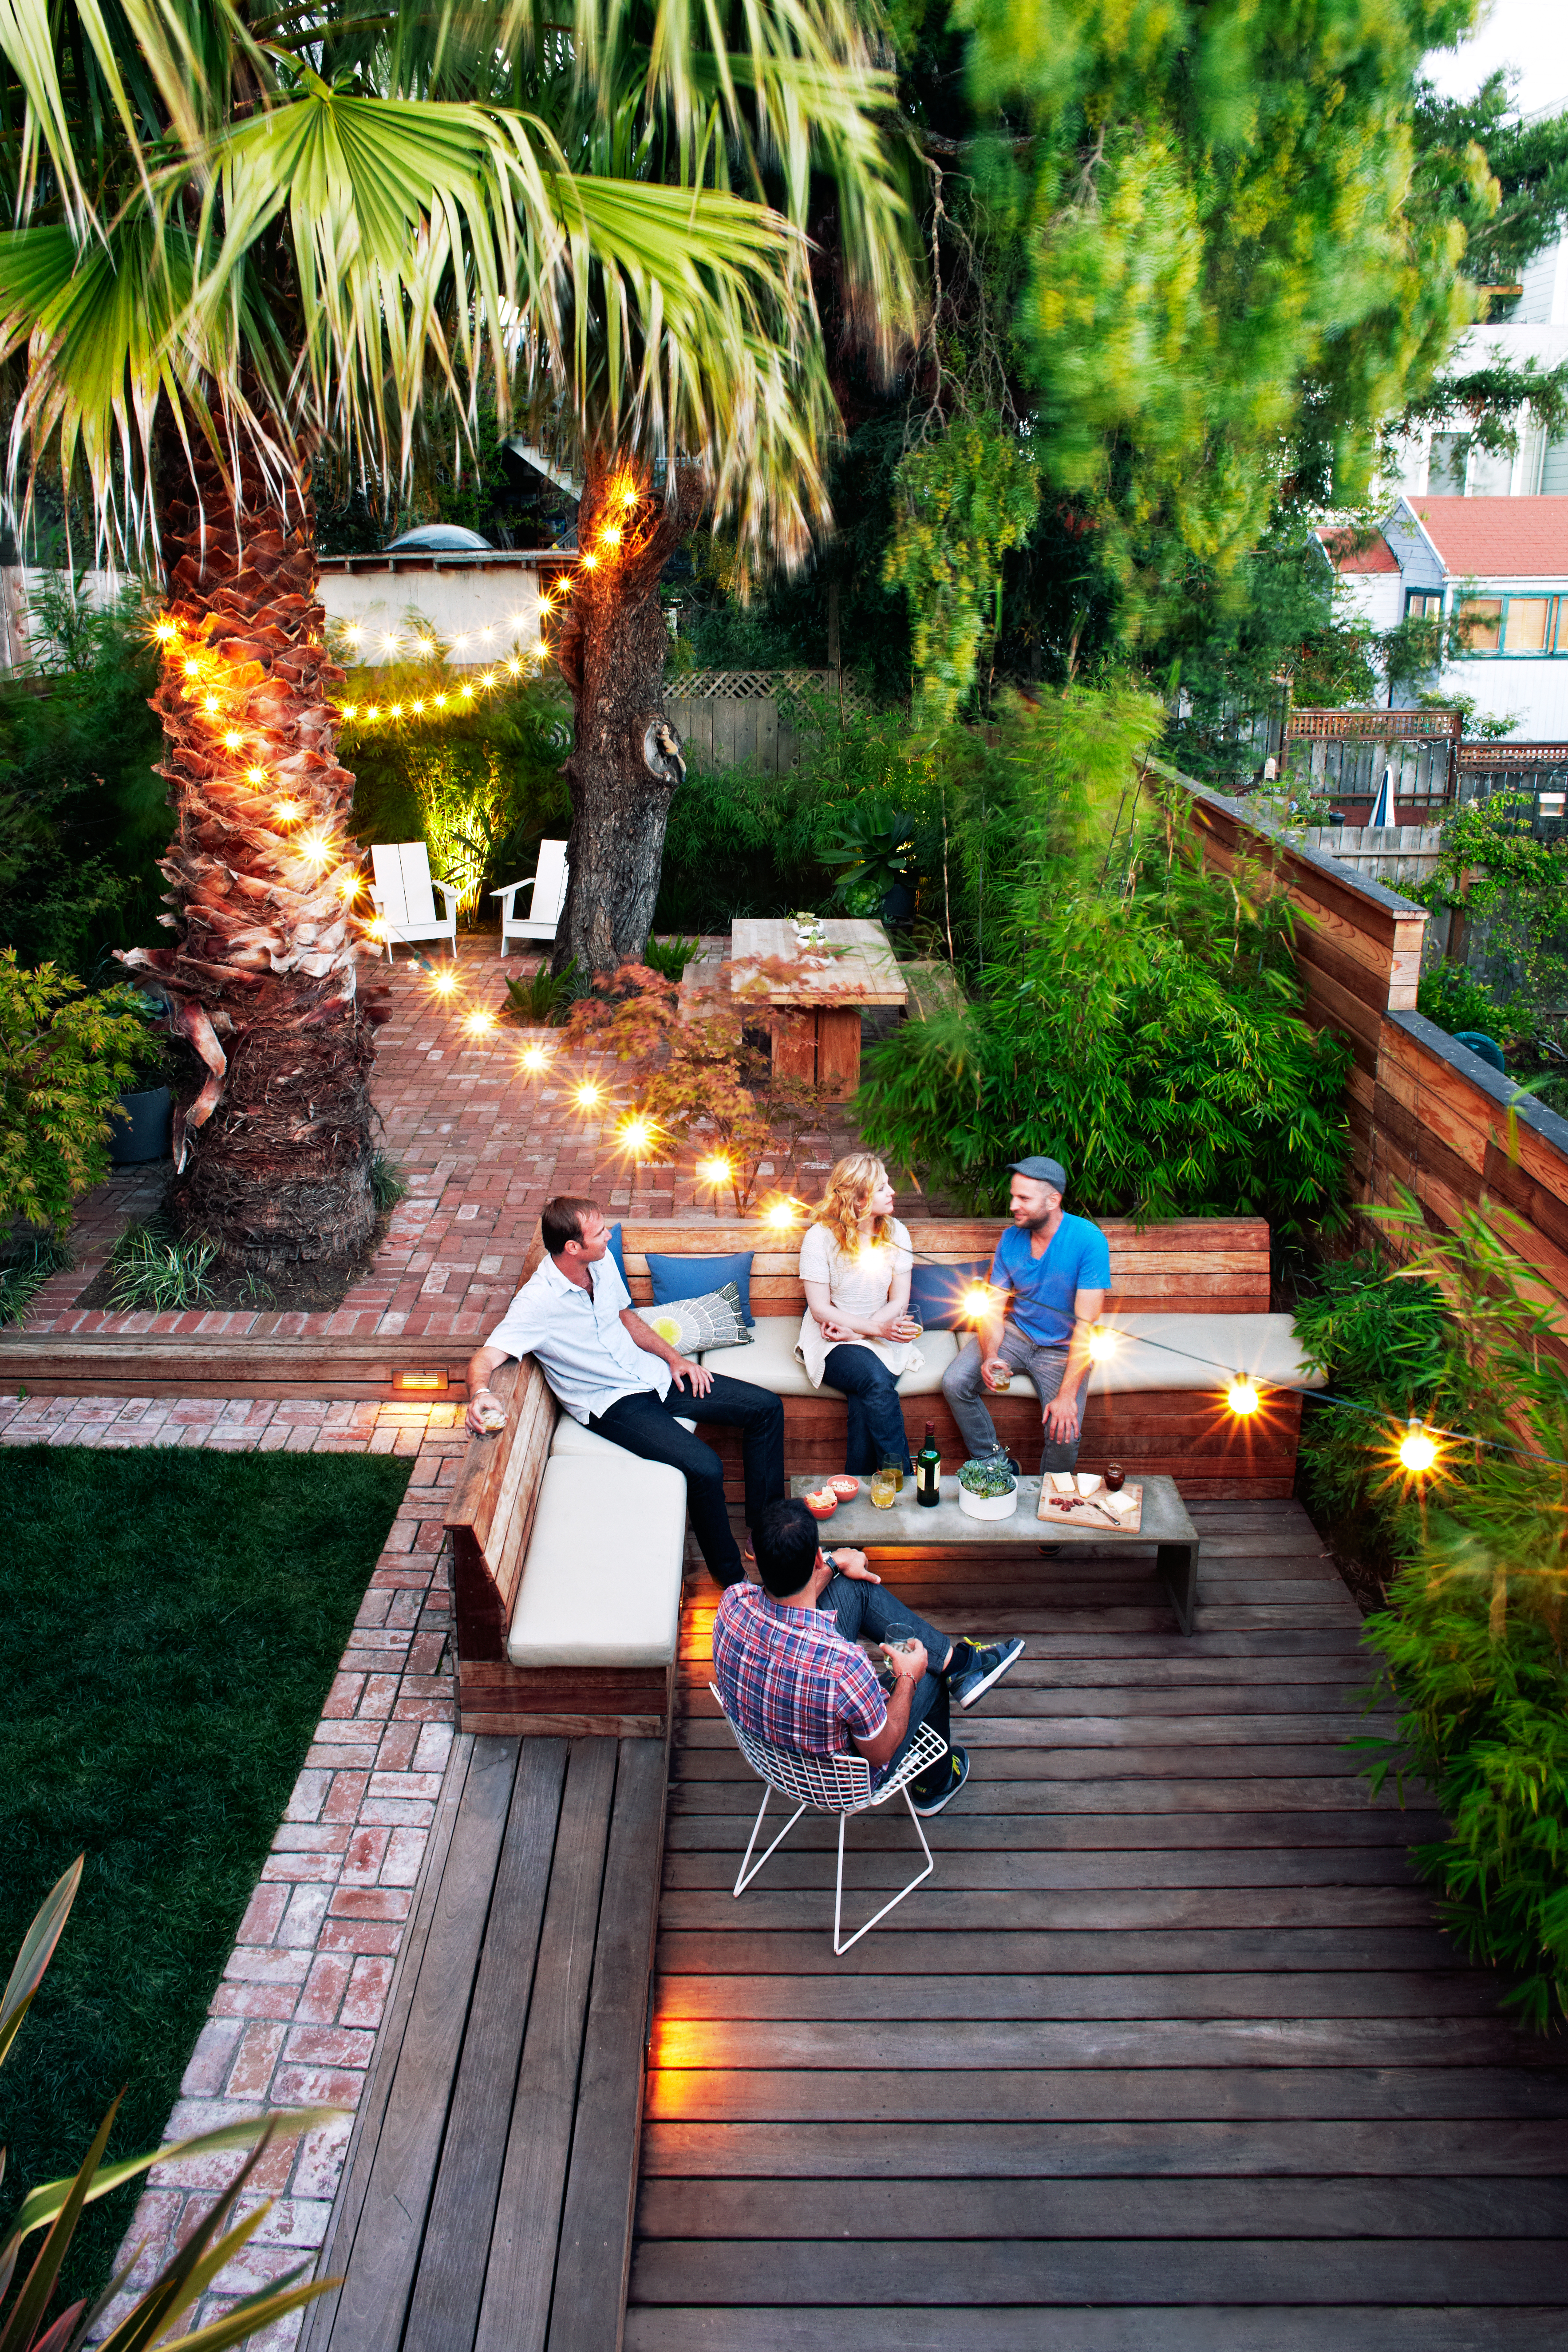 How to Design an Entertainer’s Yard